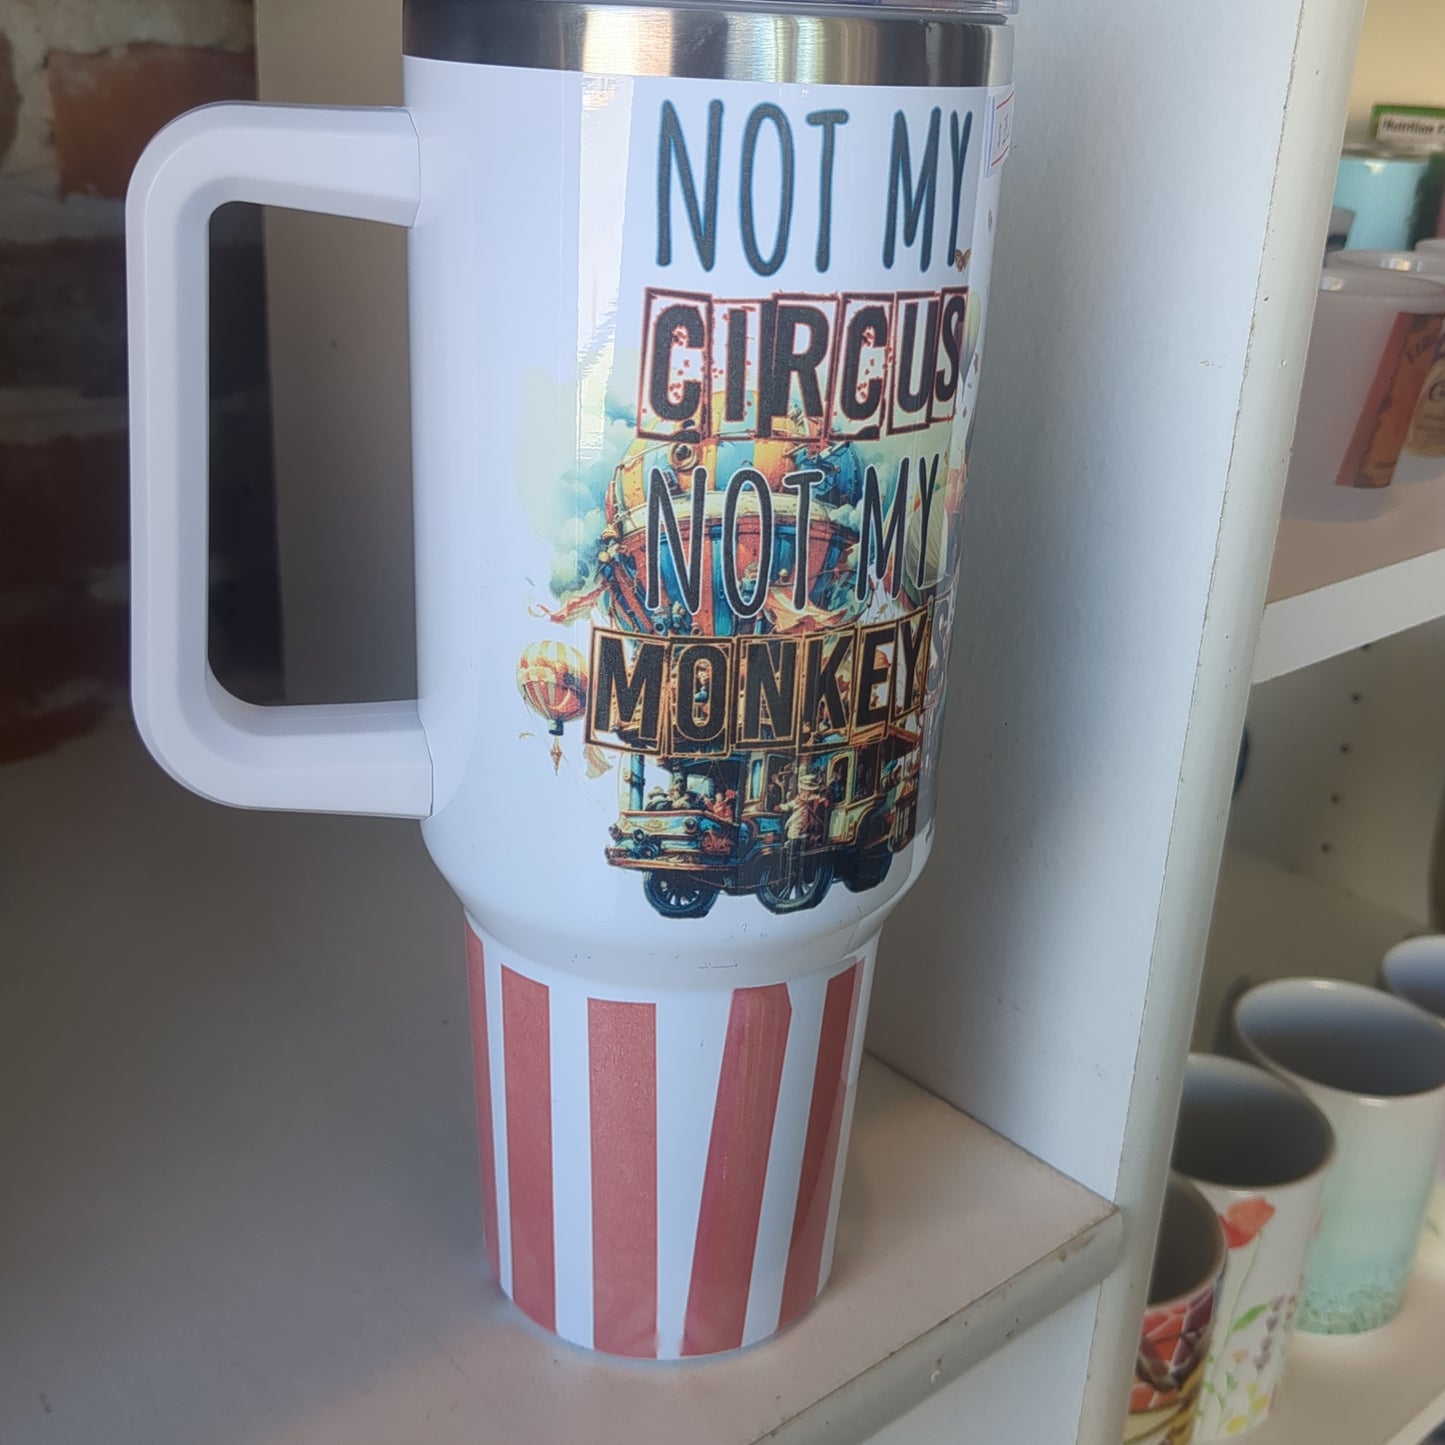 40 oz stainless steel insulated tumbler. Not my circus, not my monkeys this one has flaws.